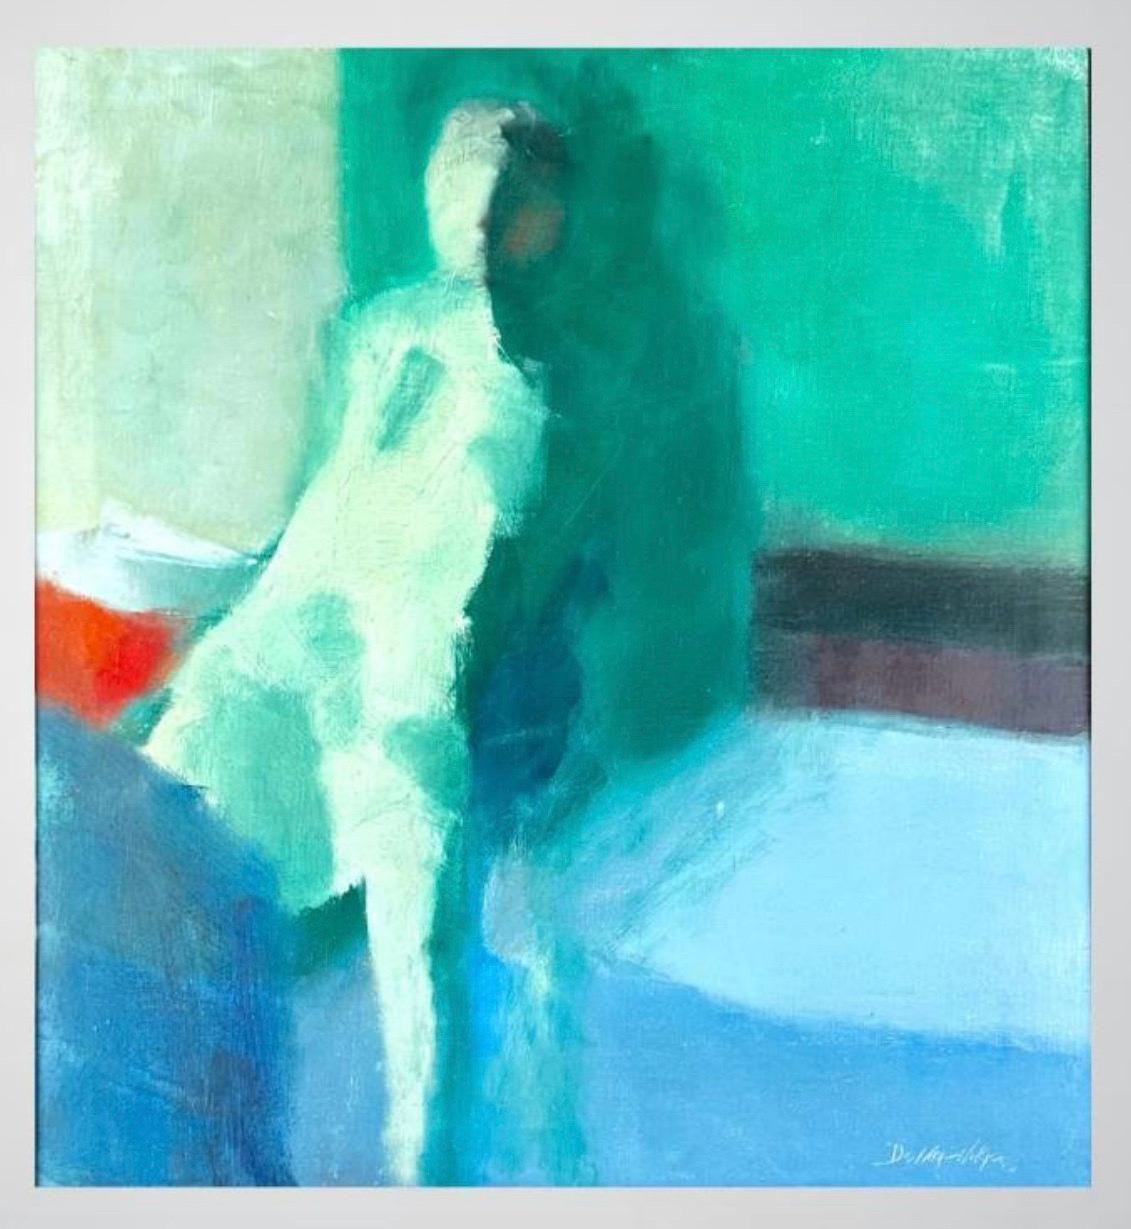 RALPH DELLA-VOLPE  (1923-2017)
Fine Art Painter, American Contemporary  
Oil on canvas
Hand signed lower right 
Artist Signed, Abstract Oil on Canvas. Figure in the distance. 
Approx: 30